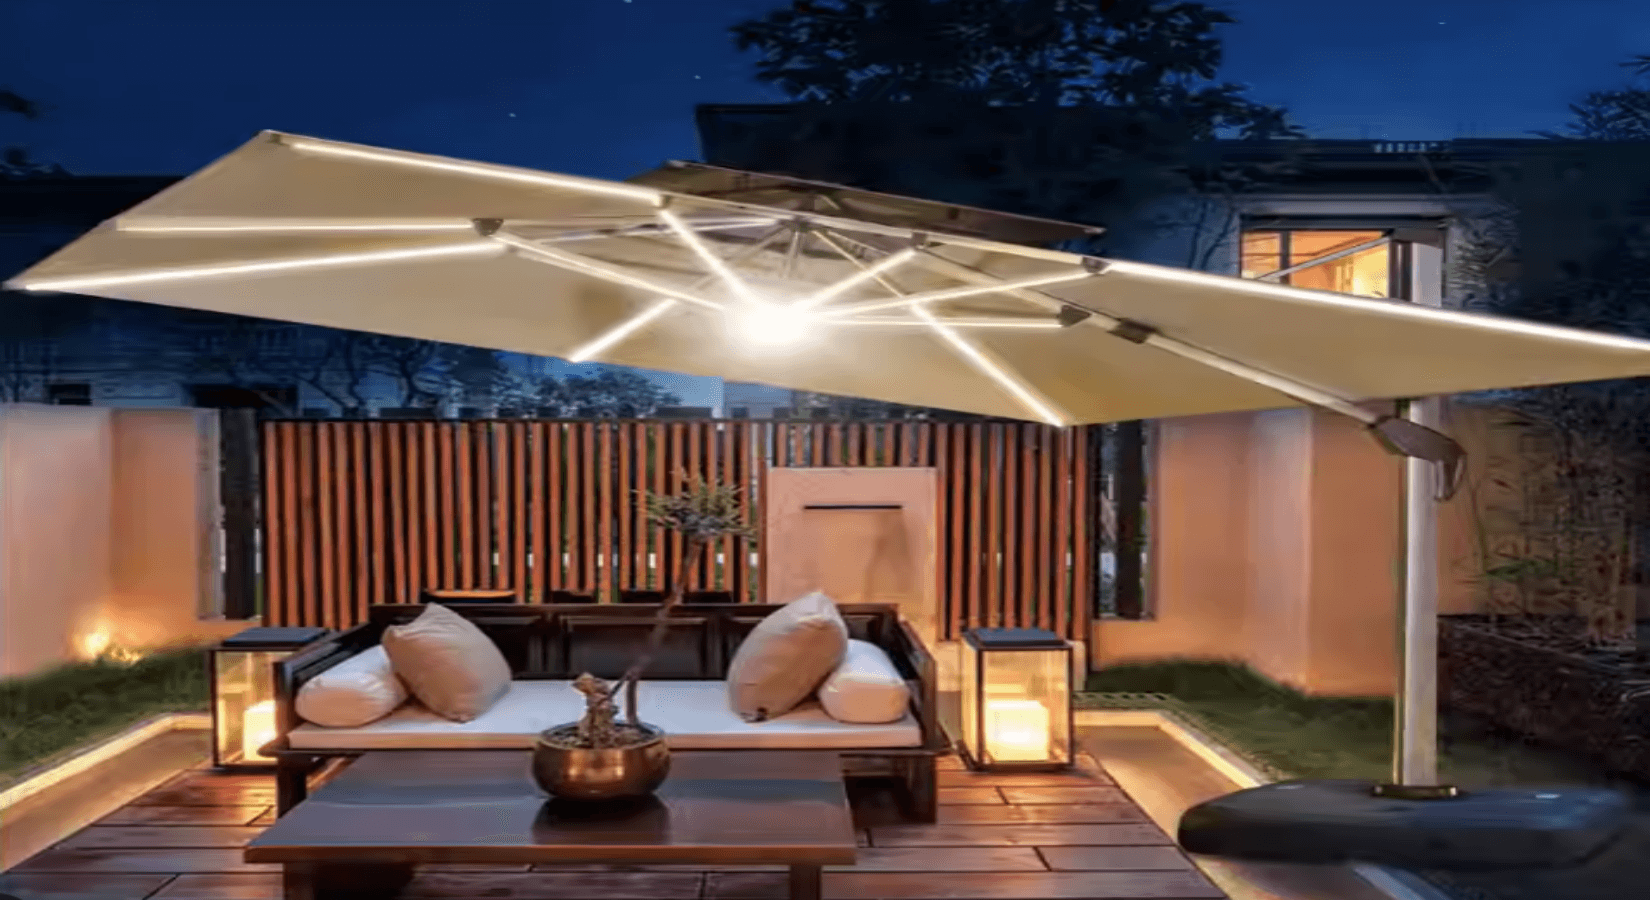 Enjoy the summer cool - the functions and advantages of sunshades - Parasol